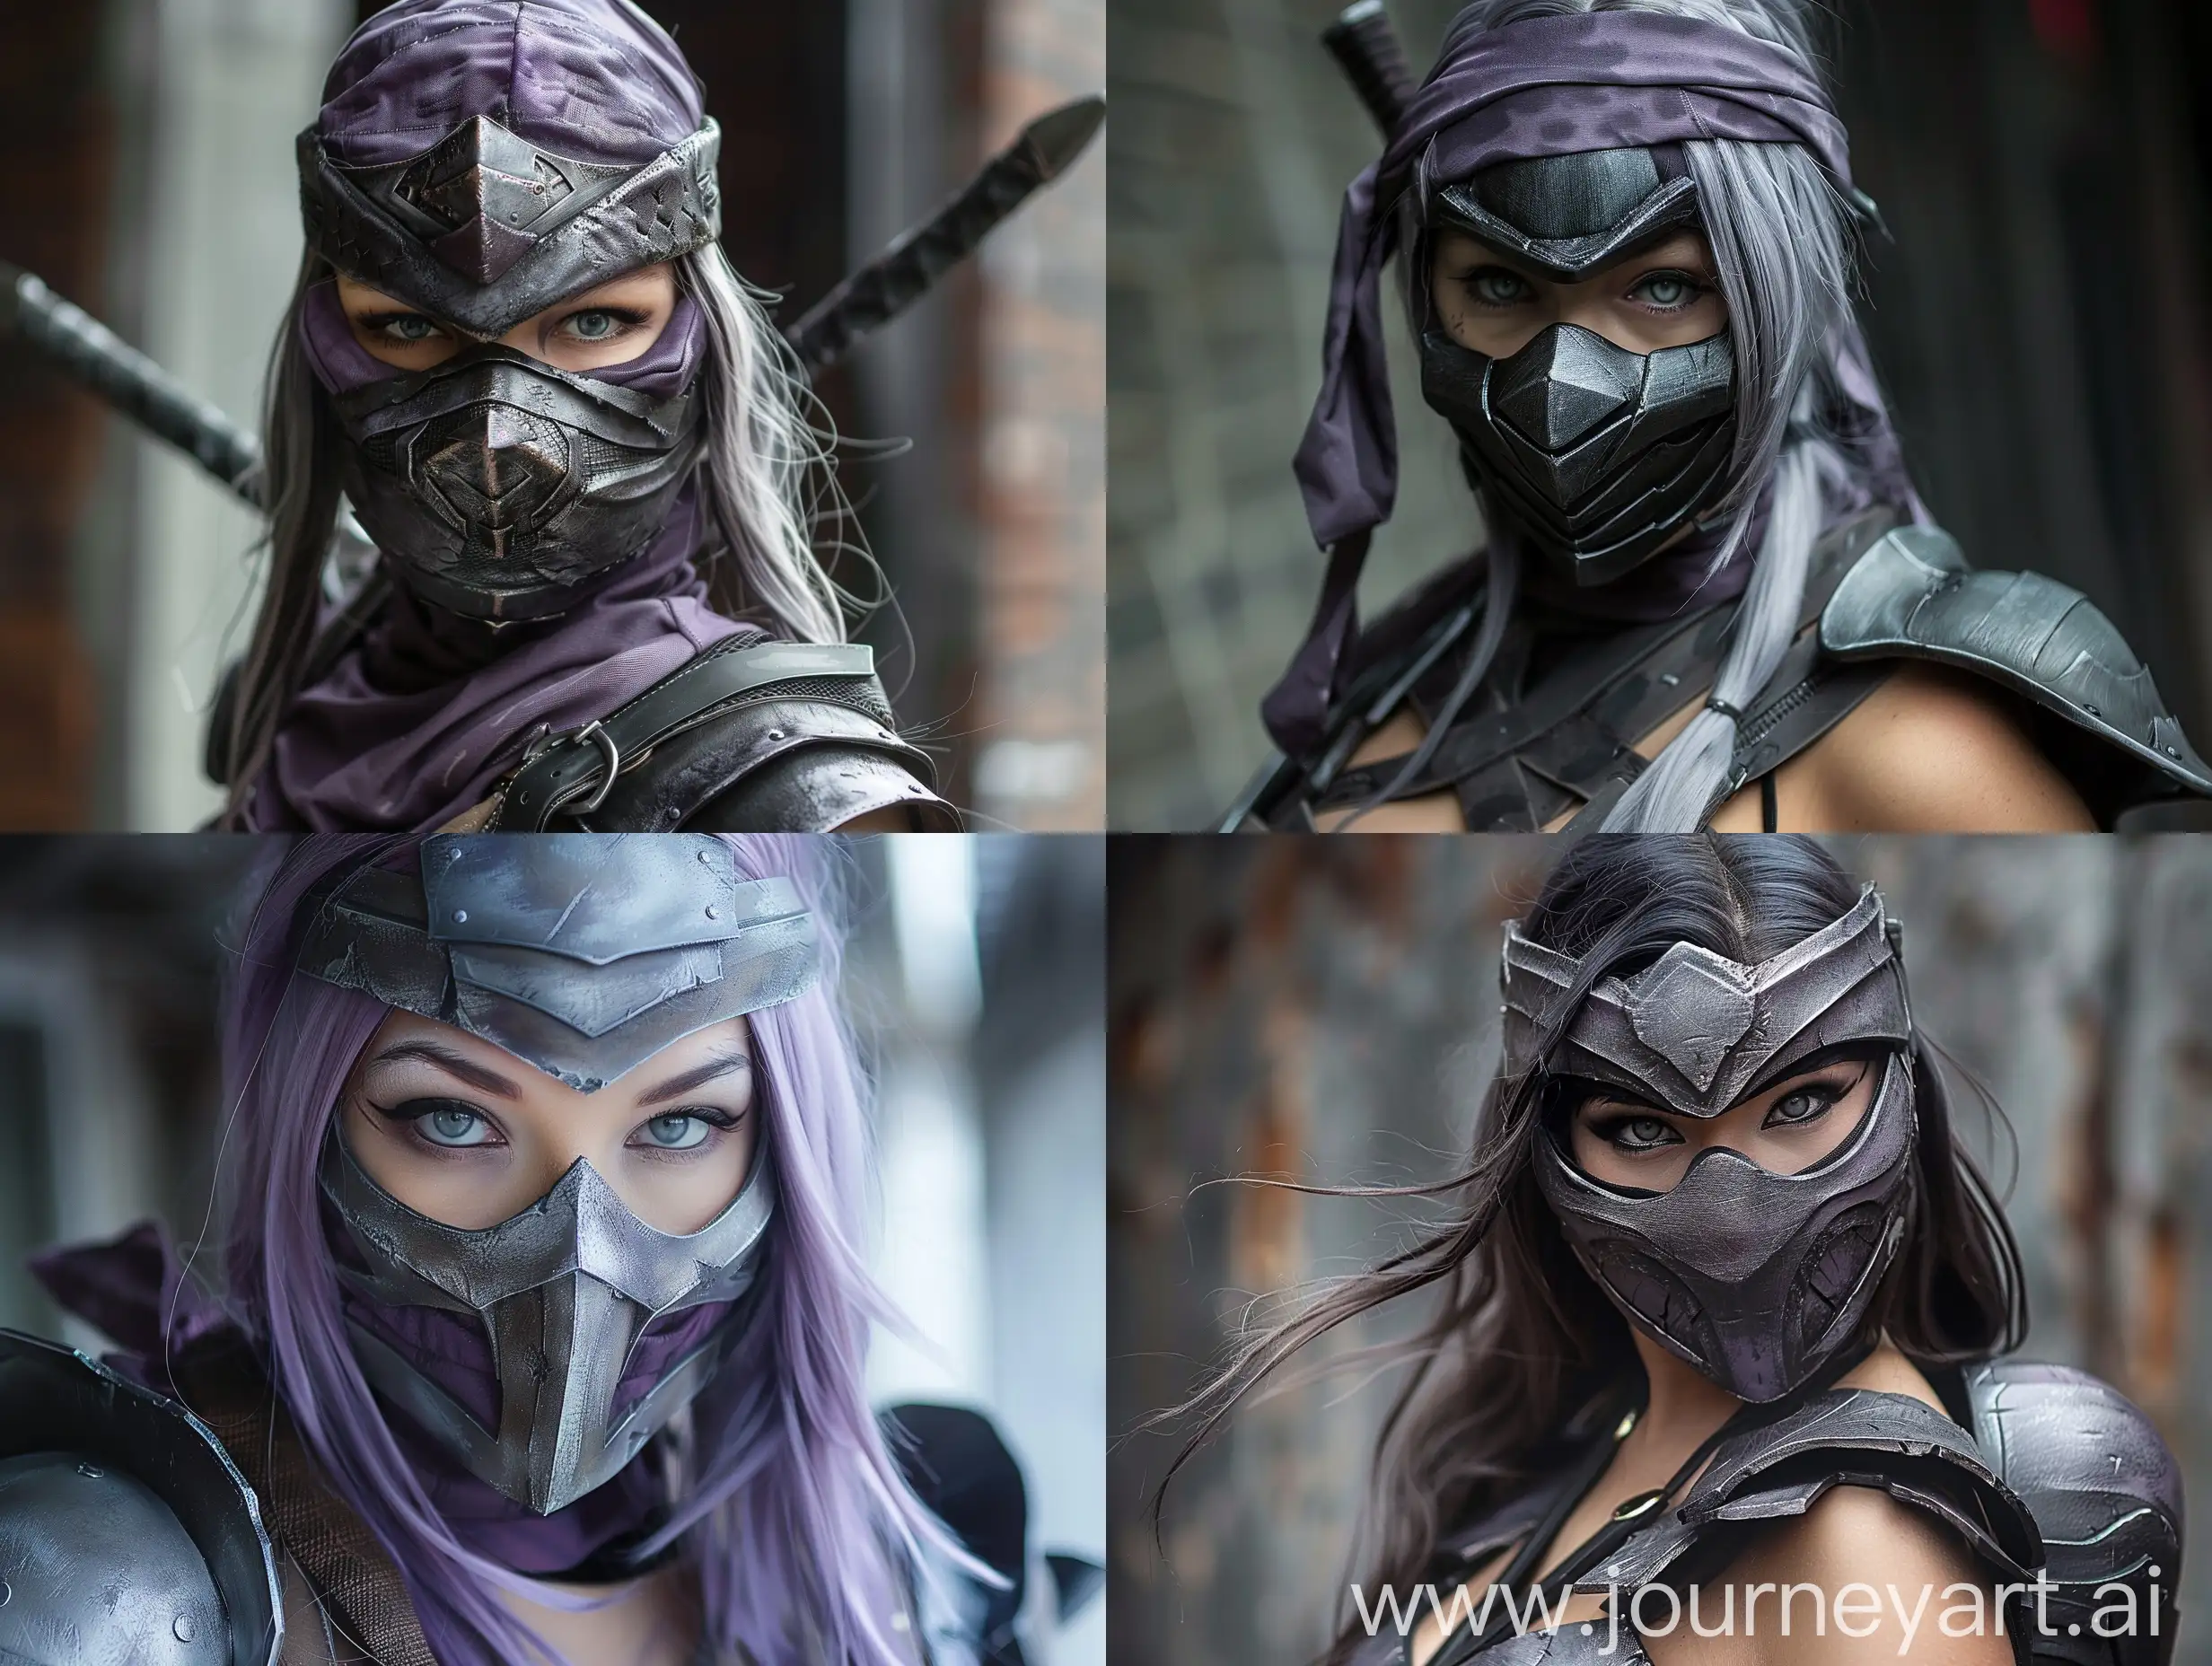 Photorealistic-Female-Cosplayer-as-Shredder-from-TMNT